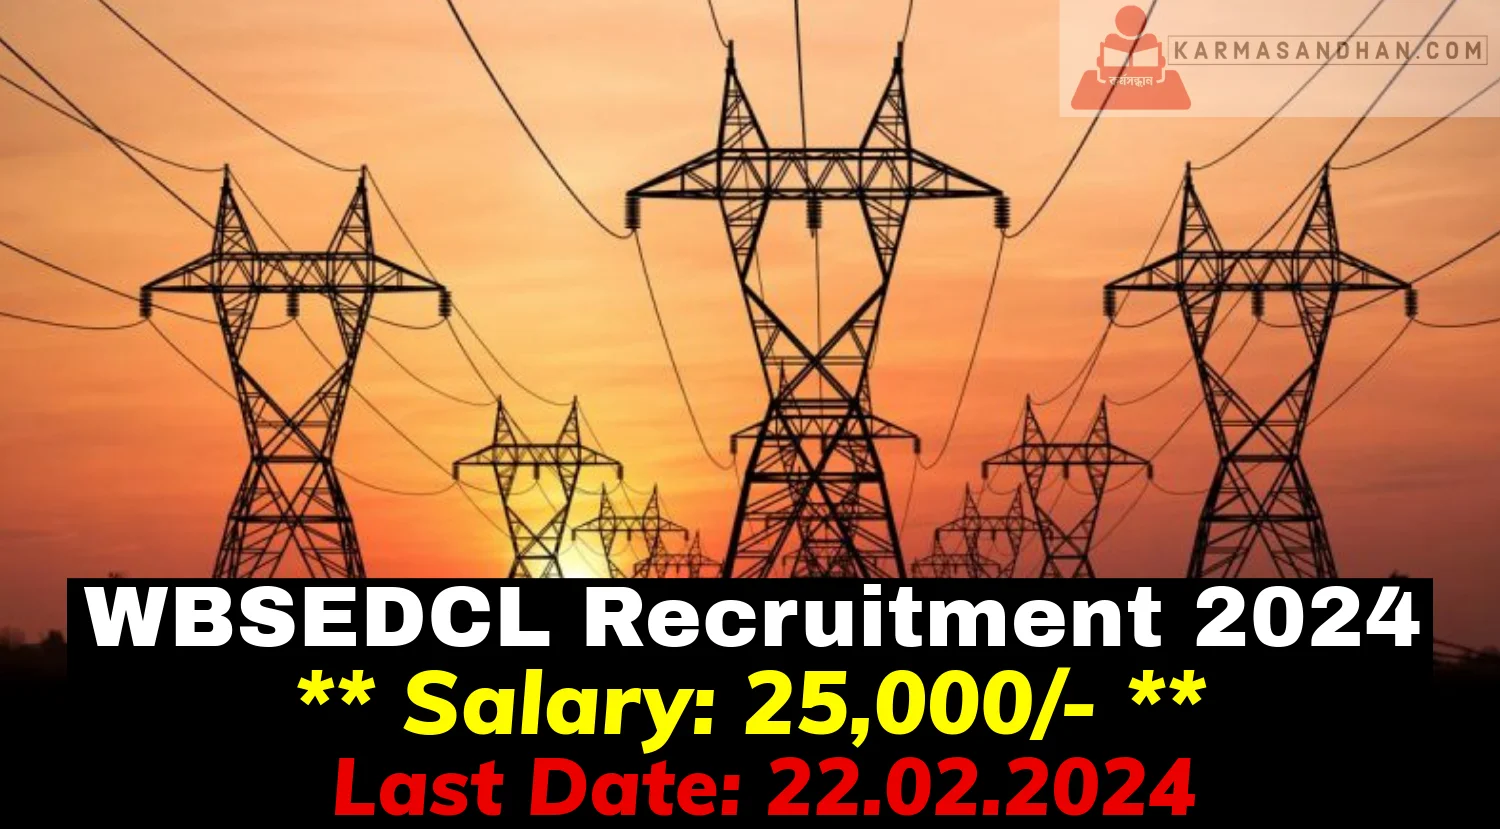 WBSEDCL Recruitment 2024 Notification Out Check Details